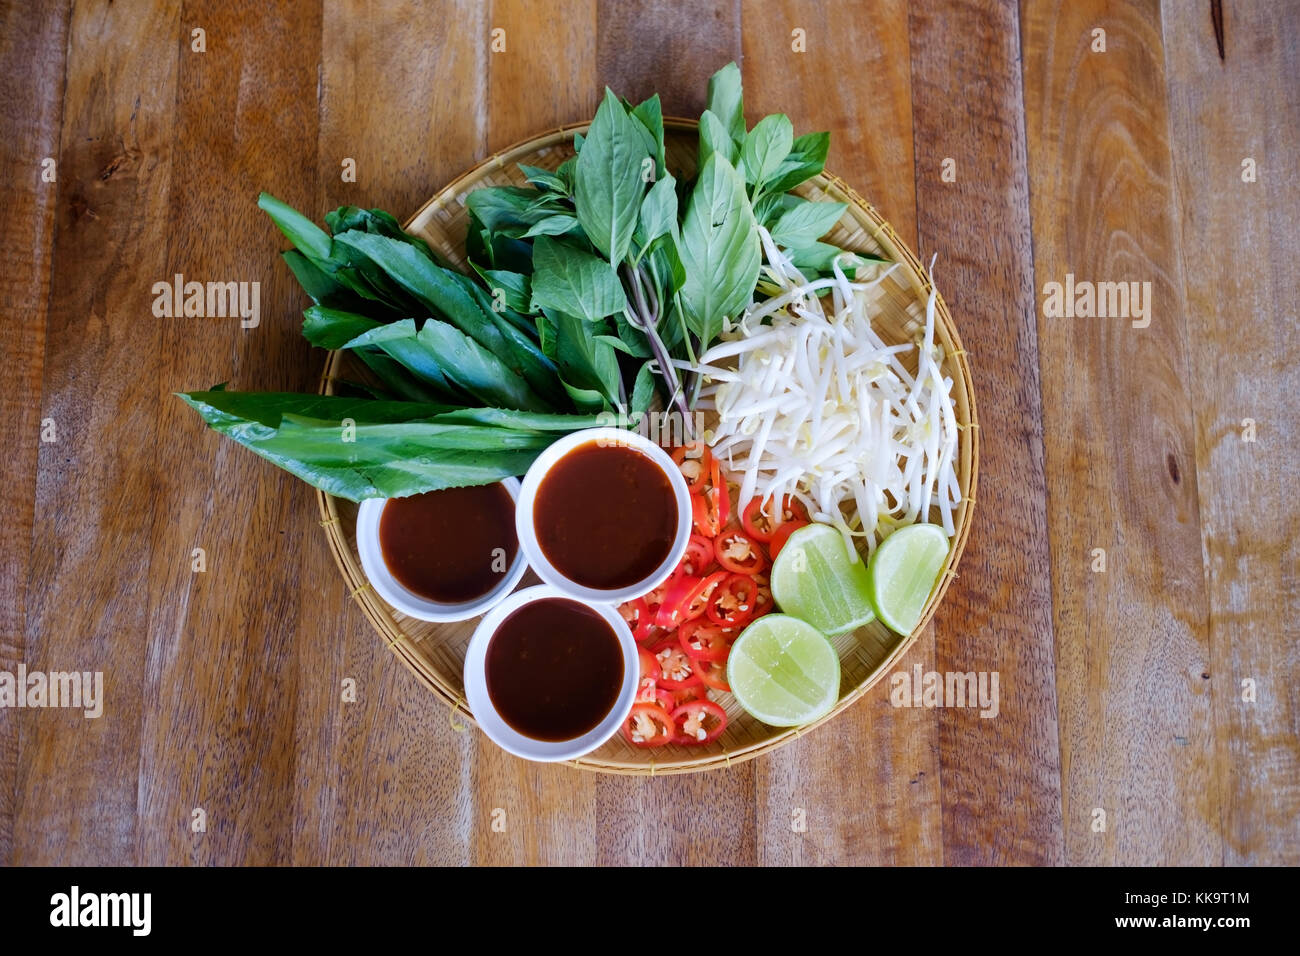 Traditional Vietnamese food. Fresh herbs. Plates on a wooden surface. Stock Photo